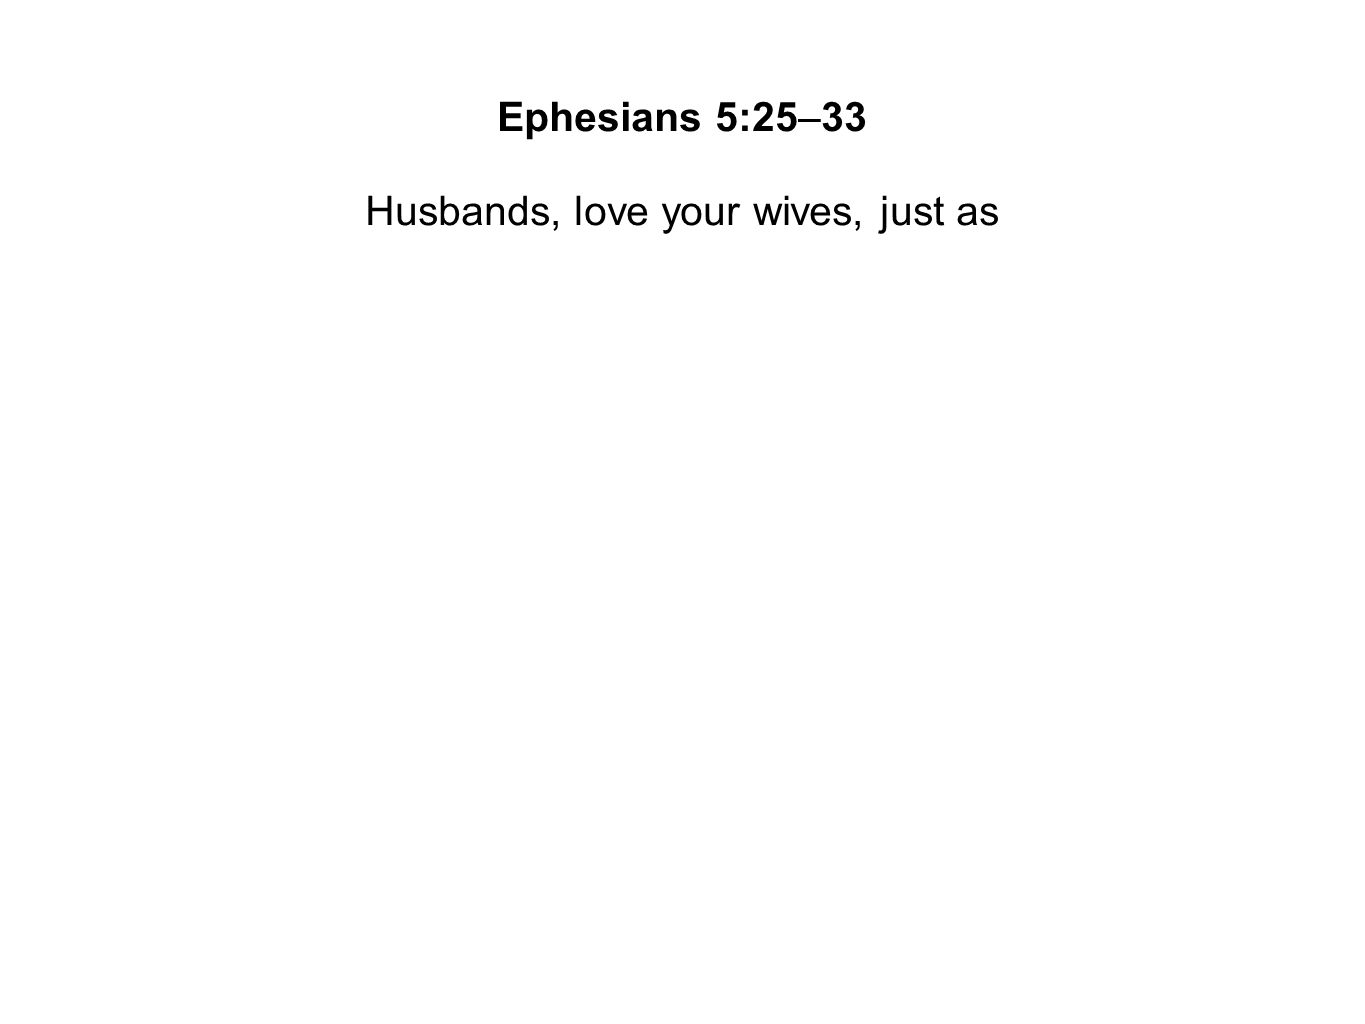 Husbands, love your wives, just as